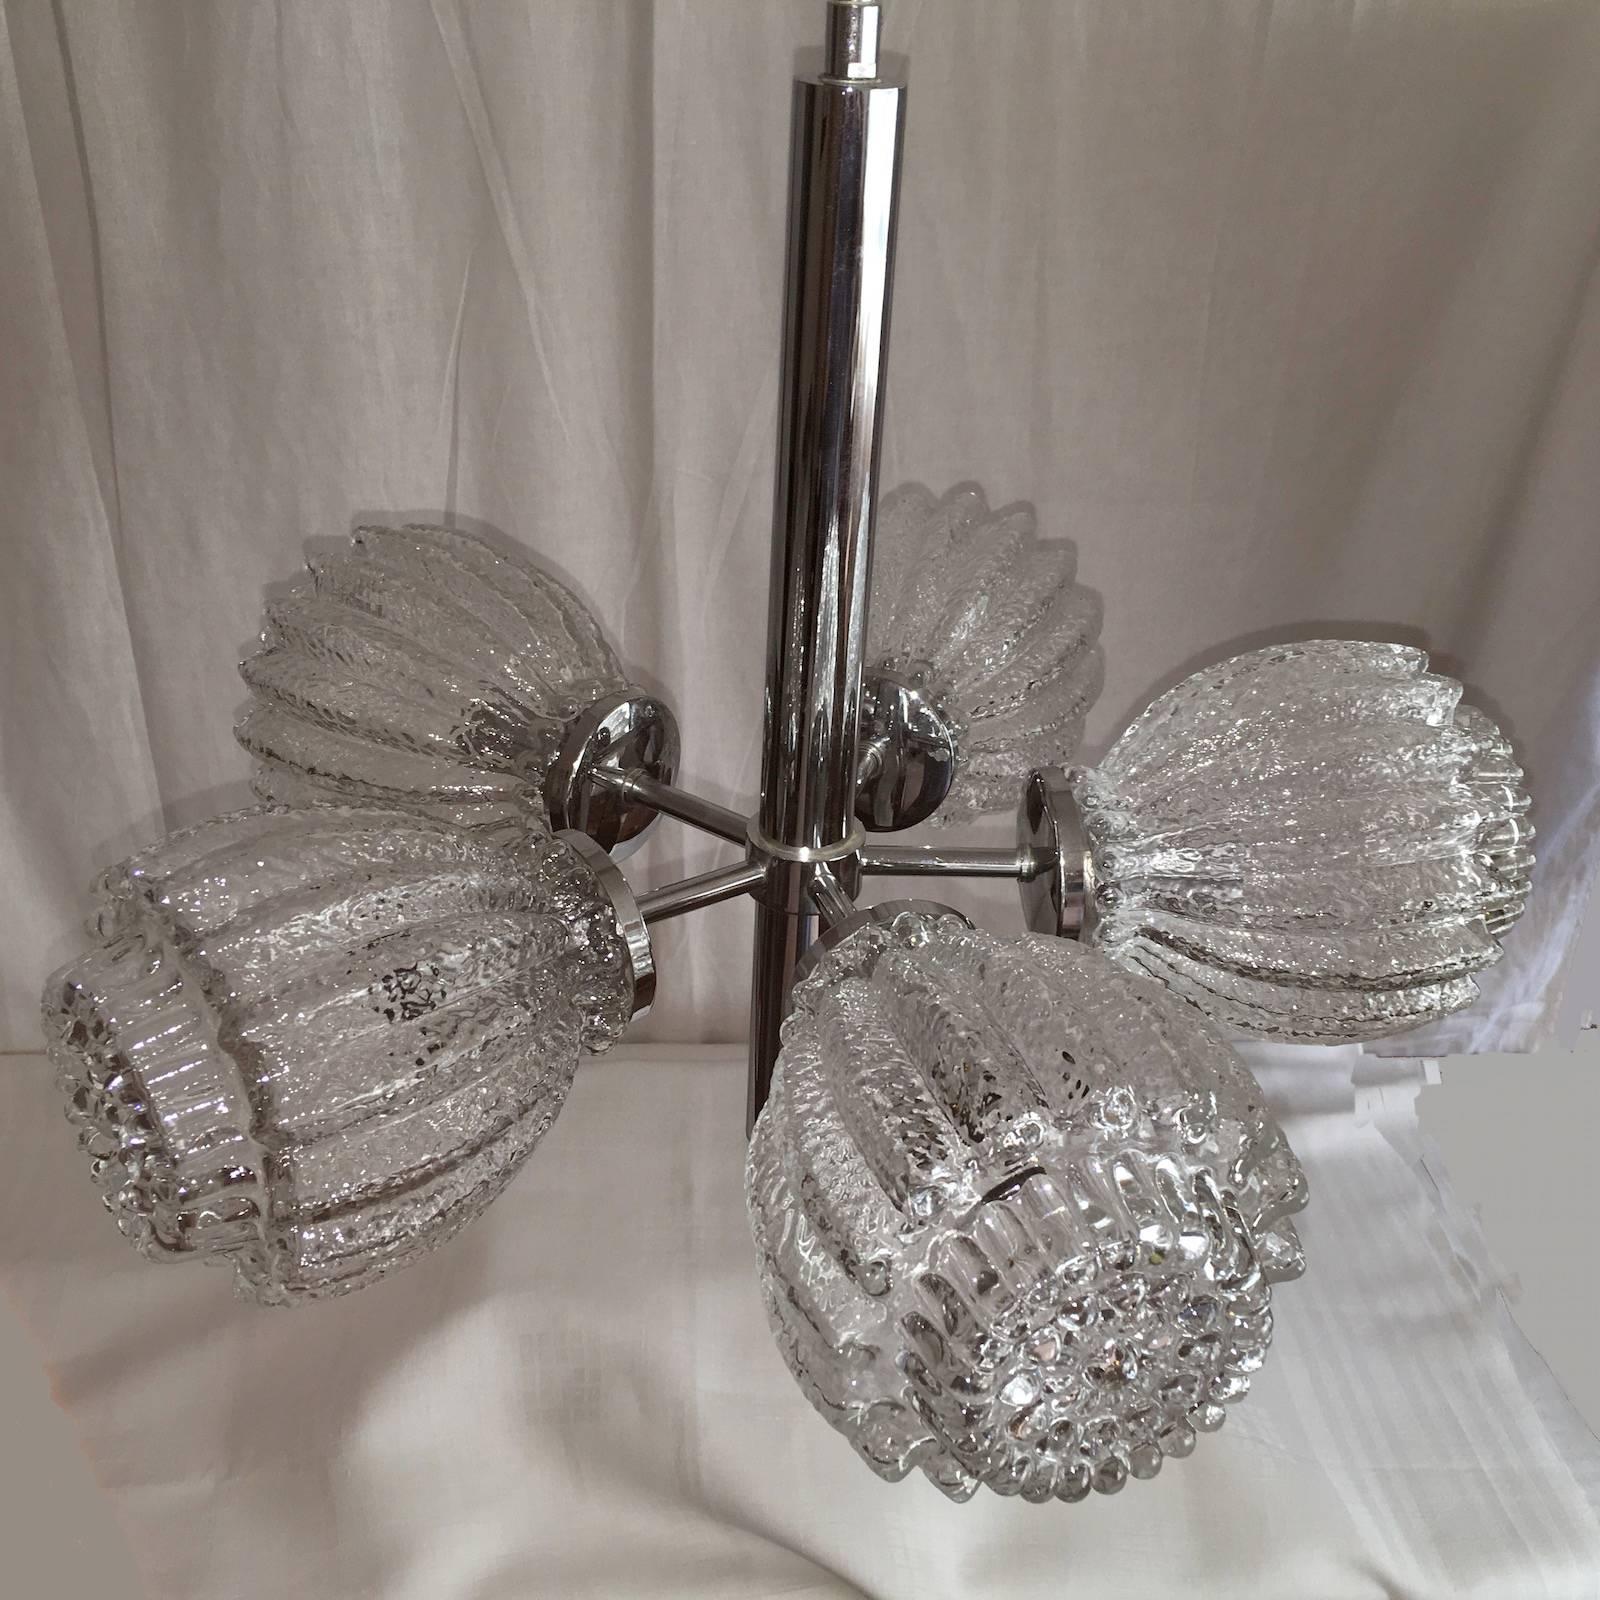 A beautiful calyx glass and chrome Mid-Century chandelier. A chrome fixture holds five thick calyx form glasses. Fixture requires five European E14 candelabra bulbs, each bulb up to 40 watts.